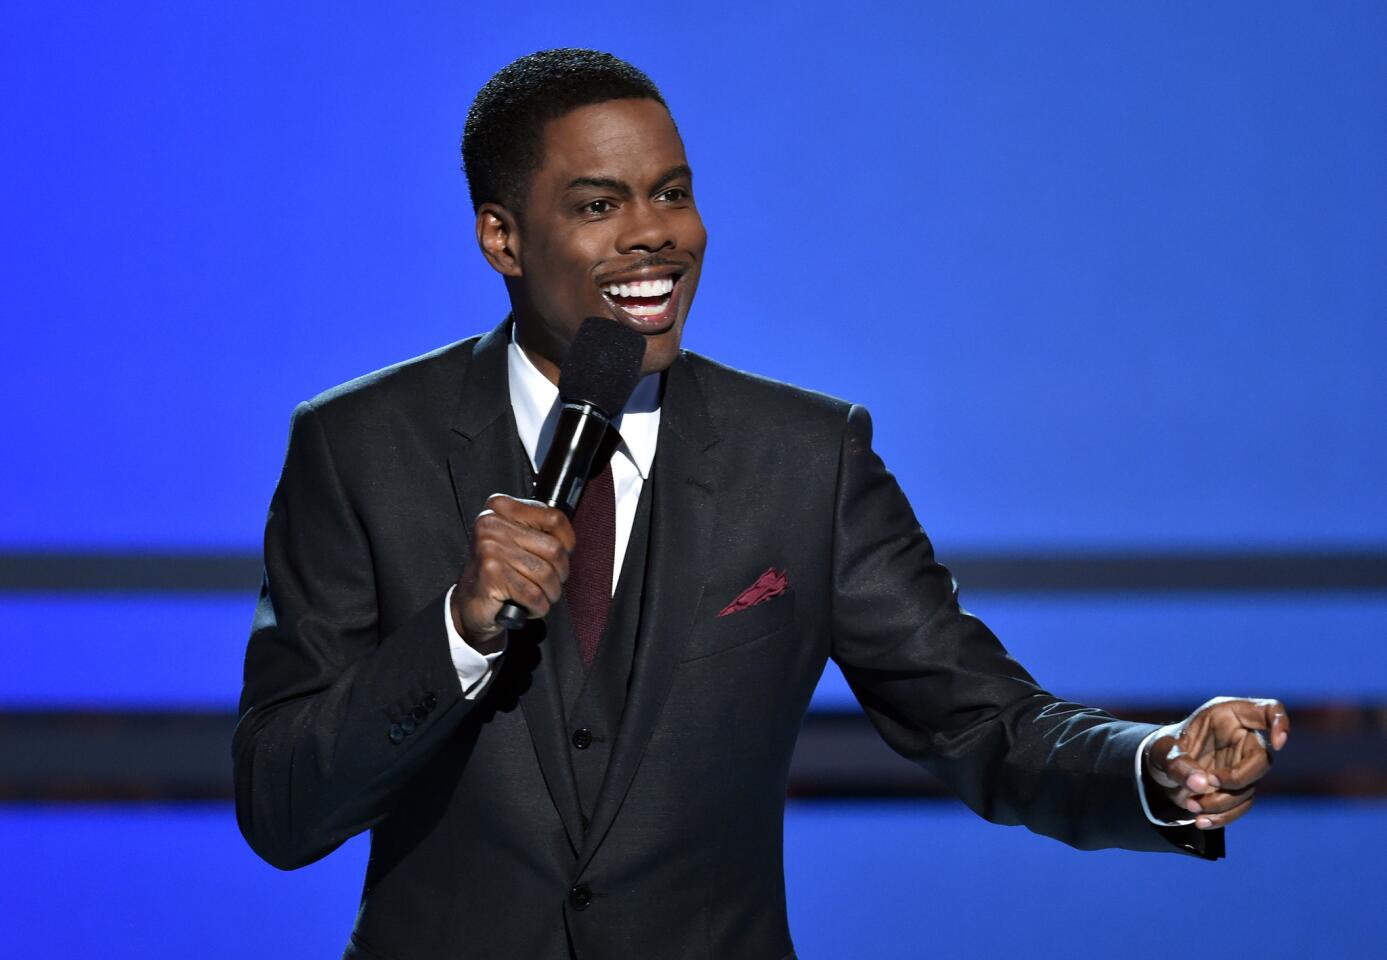 Host Chris Rock goes through his introduction onstage Sunday during the 2014 BET Awards at Nokia Theatre L.A. Live in Los Angeles.